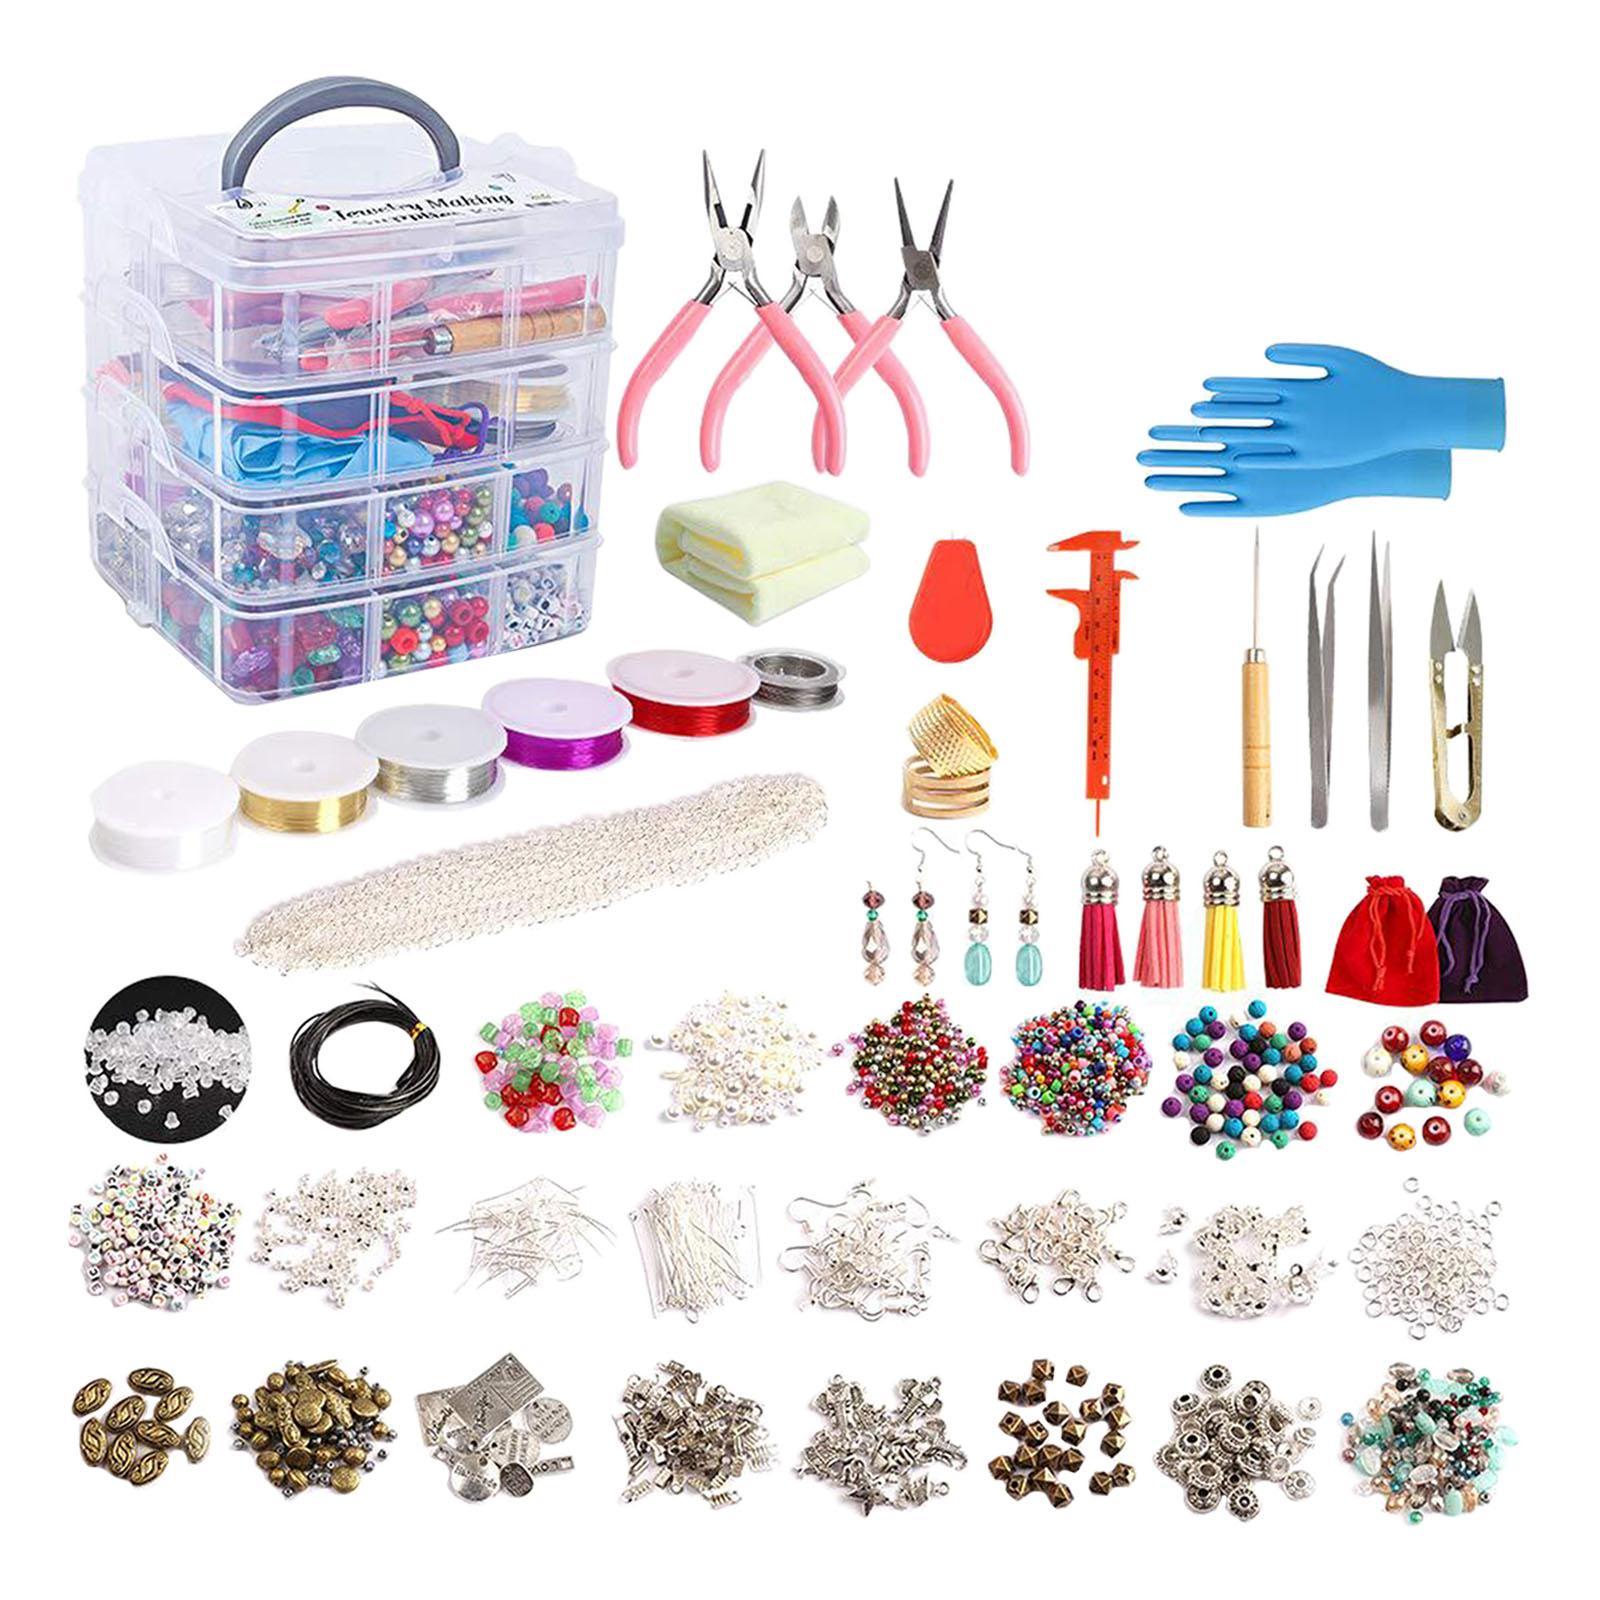 Seed Beads Bracelet Beads Assortments Crafts Set Bulk Wire Lobster Clasps Eye Pins Earwires for Necklaces Jewelry Making